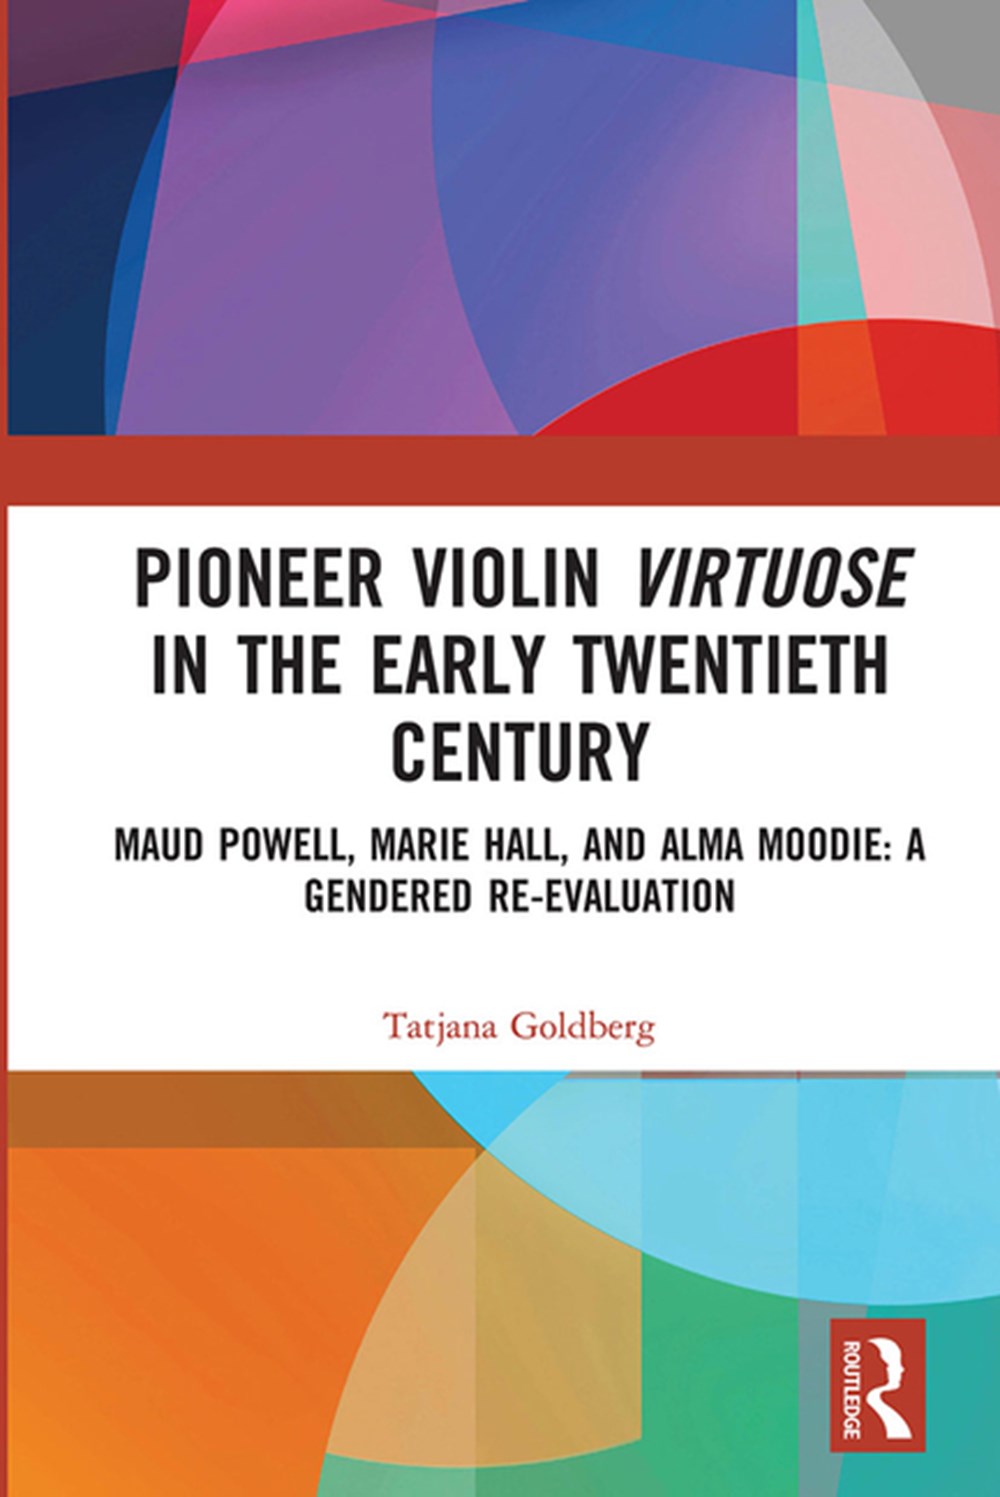 Pioneer Violin Virtuose in the Early Twentieth Century Maud Powell, Marie Hall, and Alma Moodie: A G